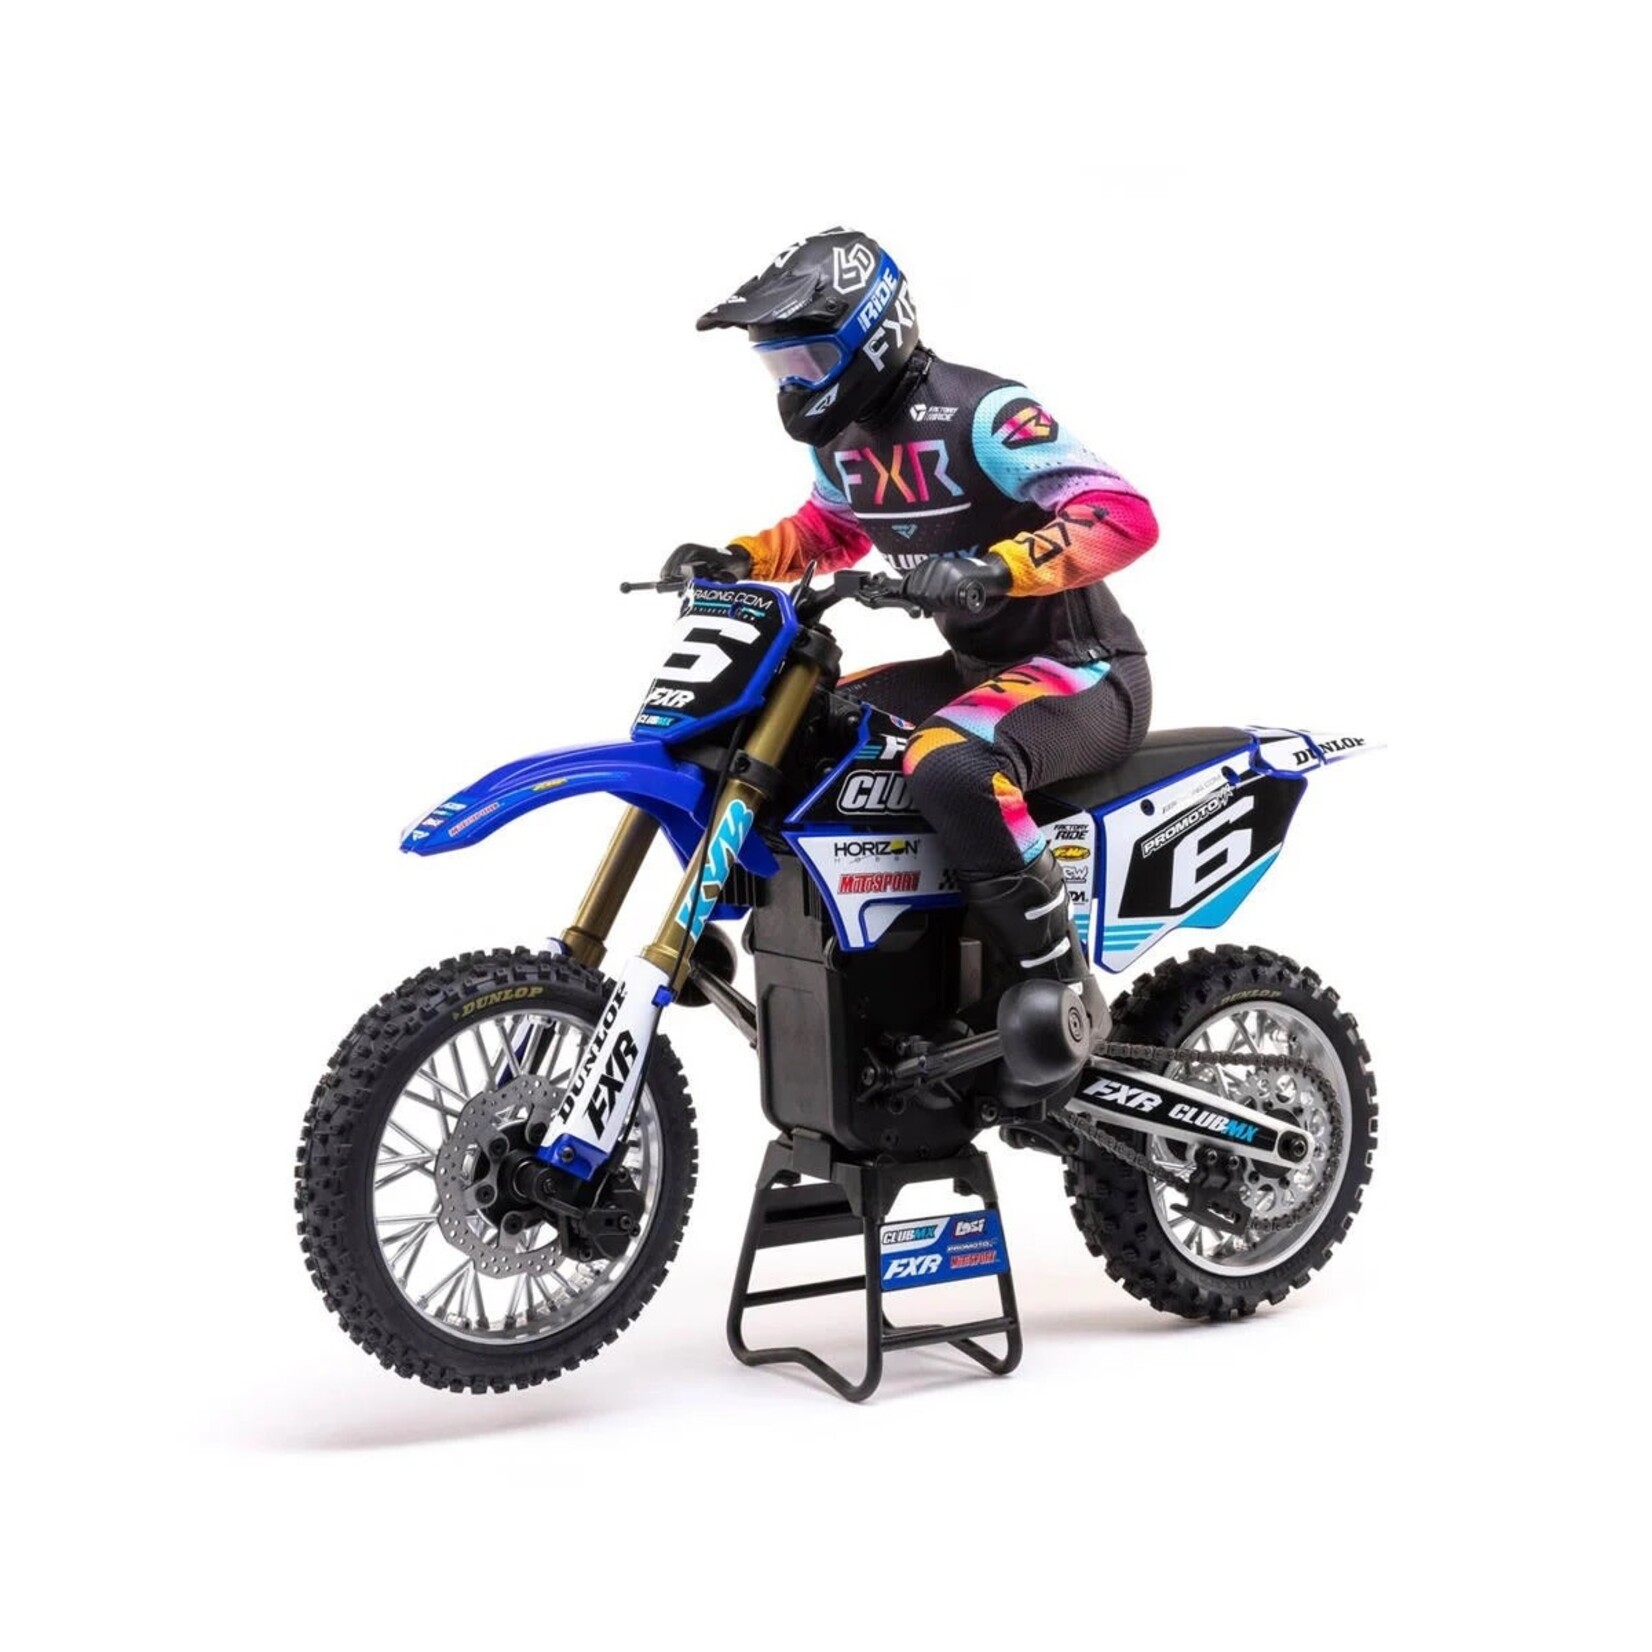 Losi Losi Promoto-MX RTR 1/4 Brushless Motorcycle (ClubMX) w/2.4GHz DX3PM Radio & MS6X System #LOS06000T2